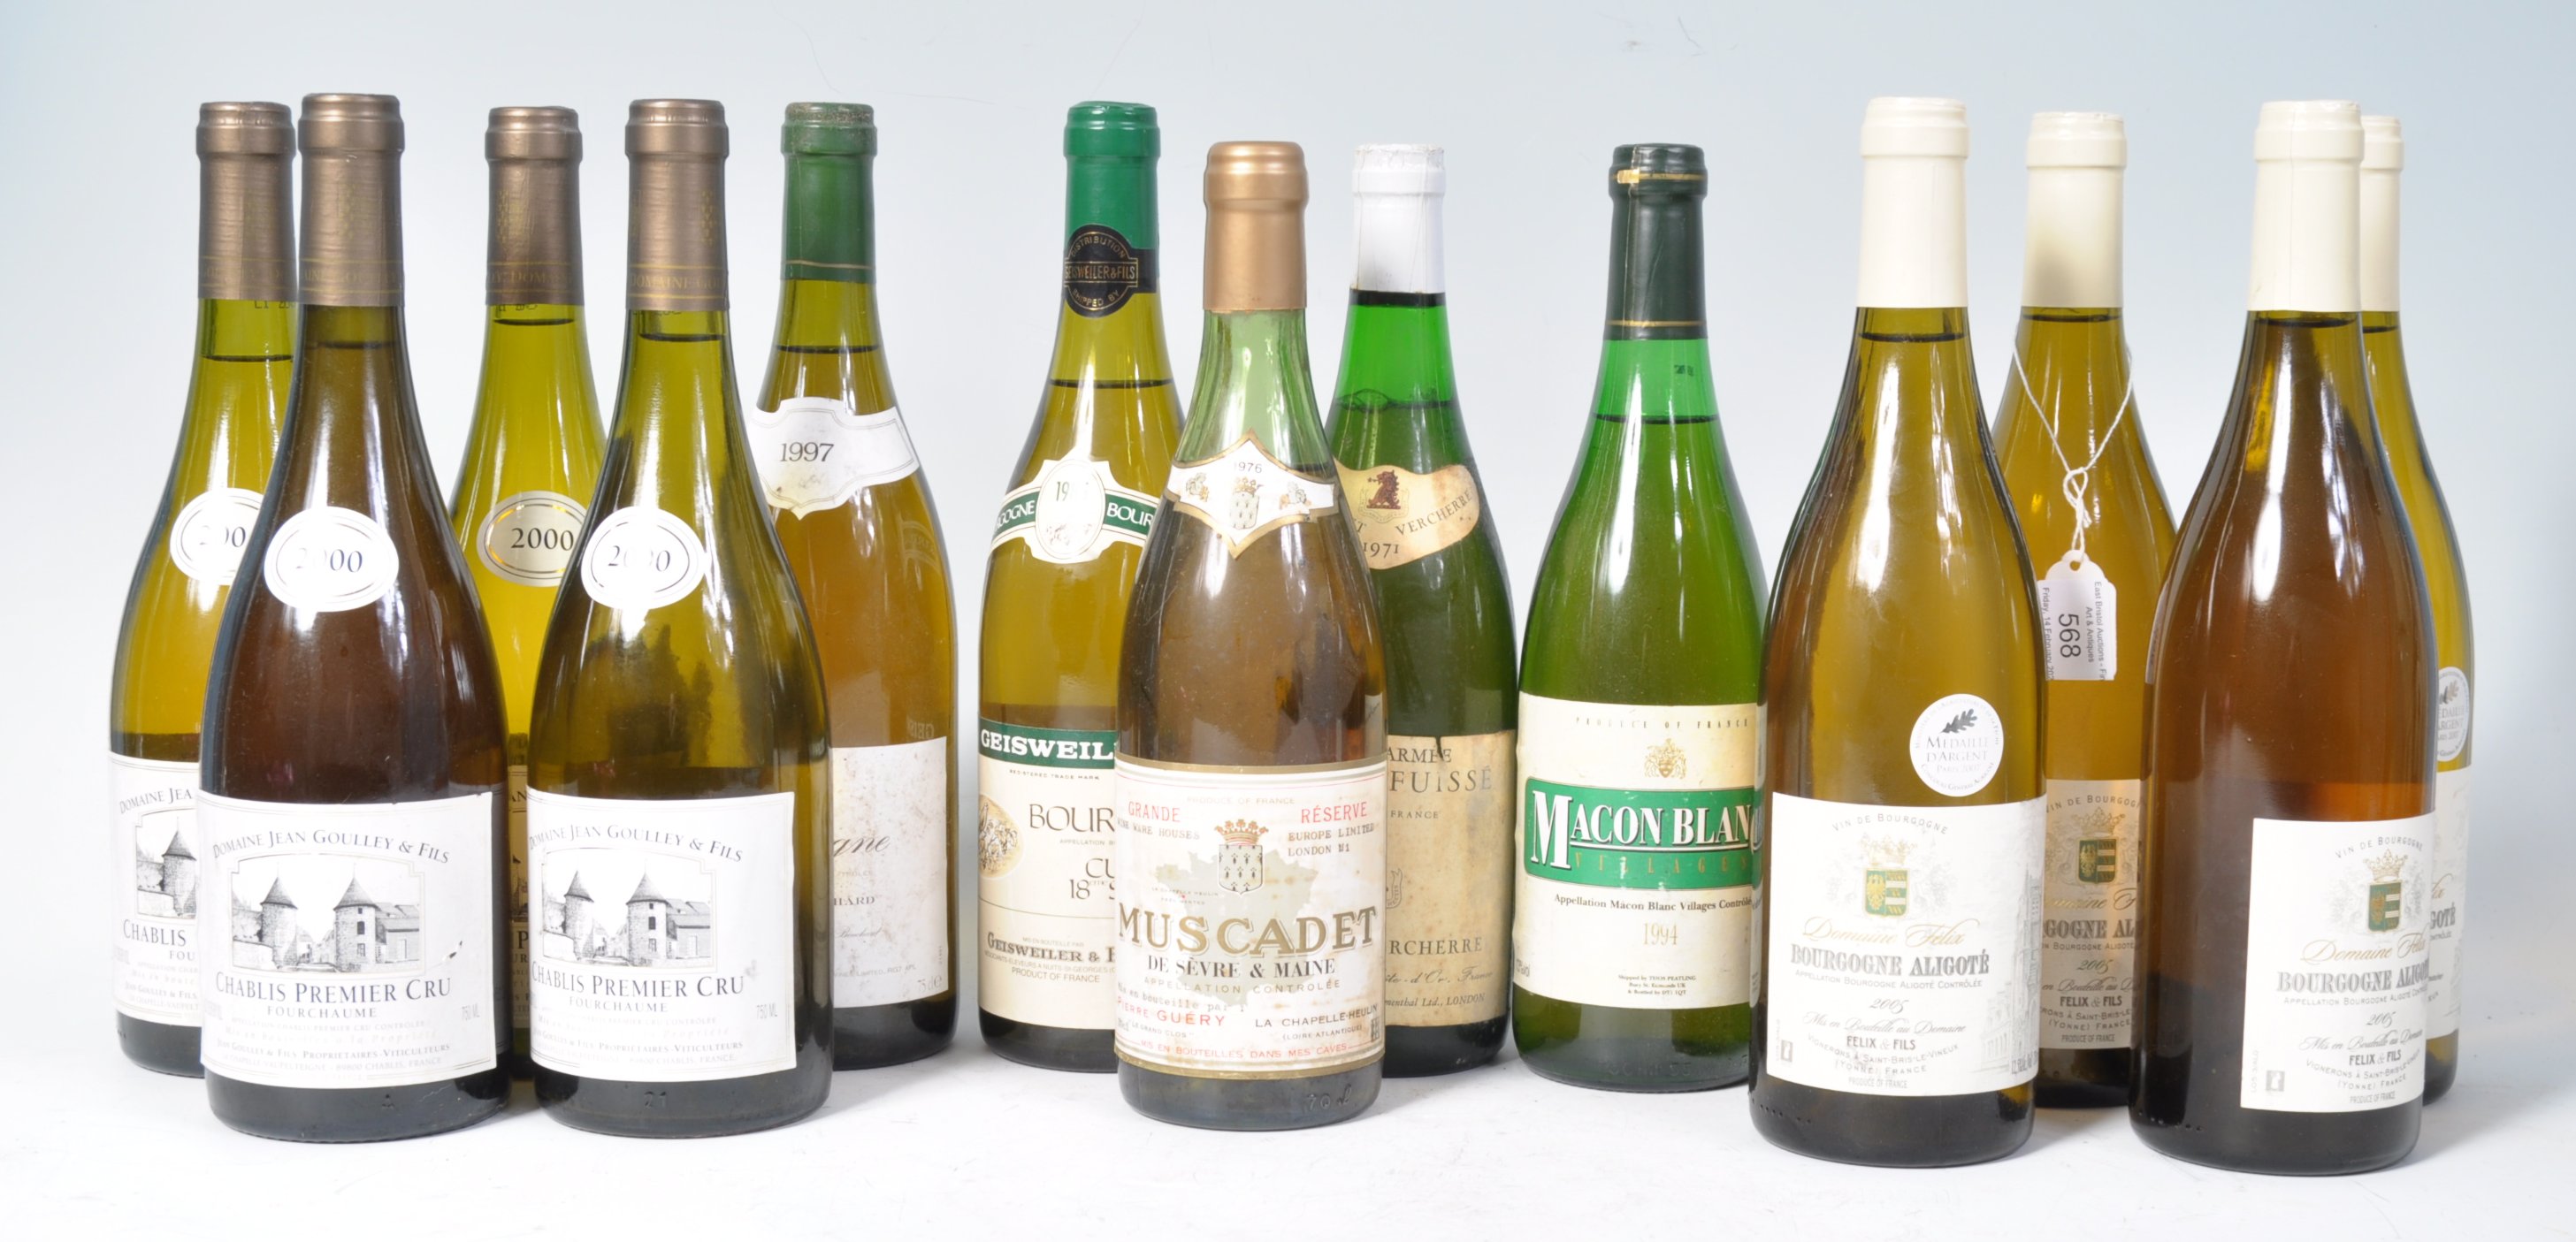 COLLECTION OF ASSORTED FRENCH WHITE WINE